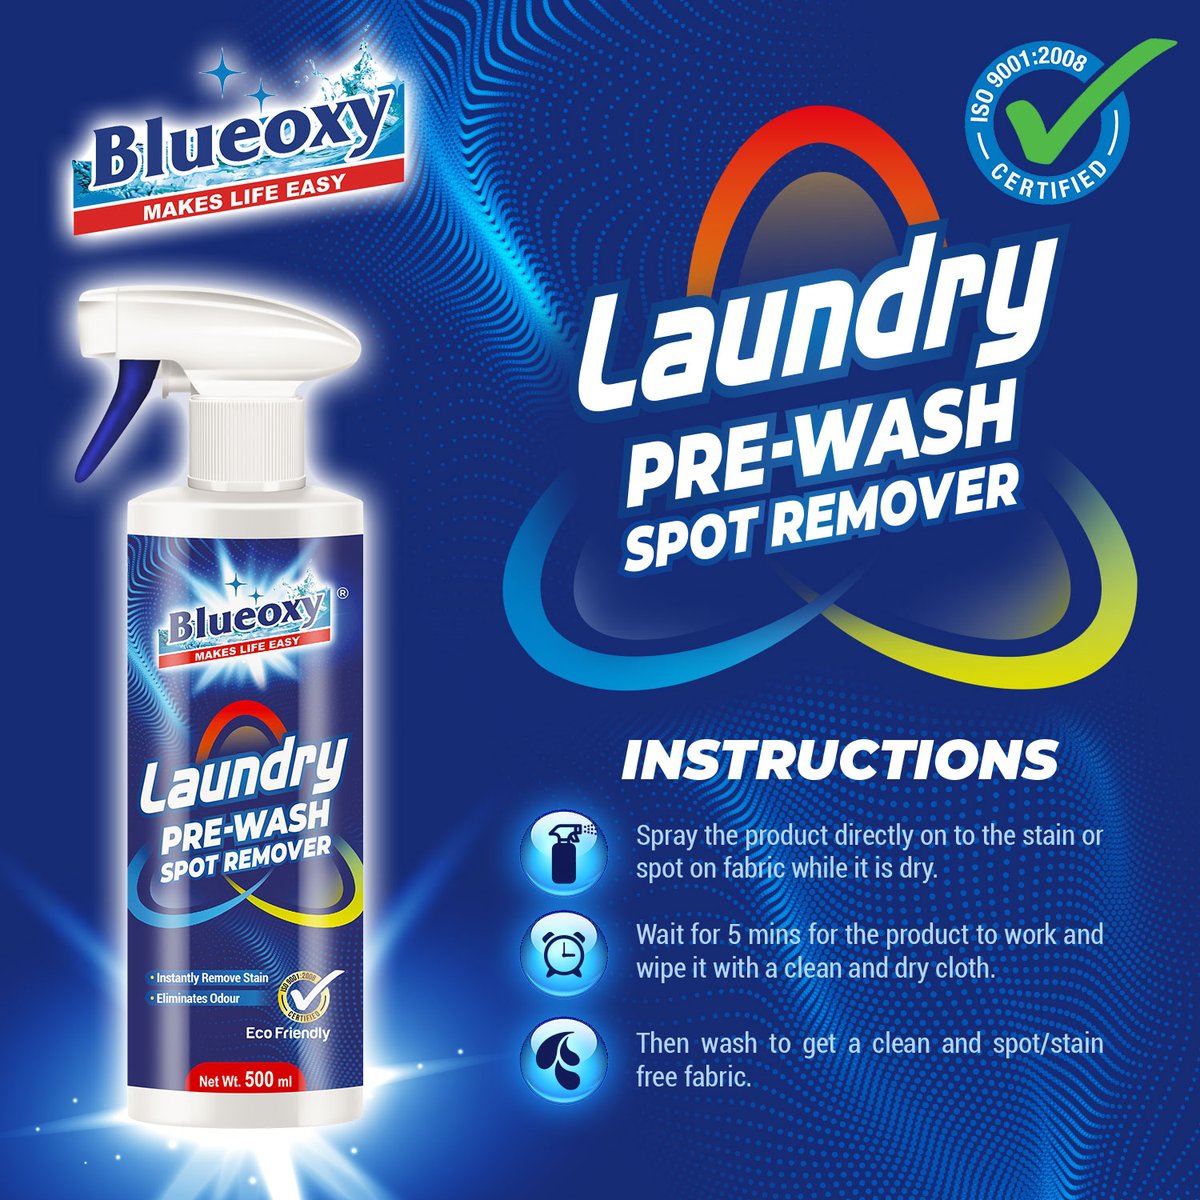 Say goodbye to stubborn stains and unpleasant odors with Blueoxy Laundry Pre-wash spot remover. Its powerful formula works instantly, leaving your clothes spotless and smelling fresh. 

#laundry #laundryday #laundryroom #laundryservice #laundrytime #BlueoxyProducts #MakesLifeEasy